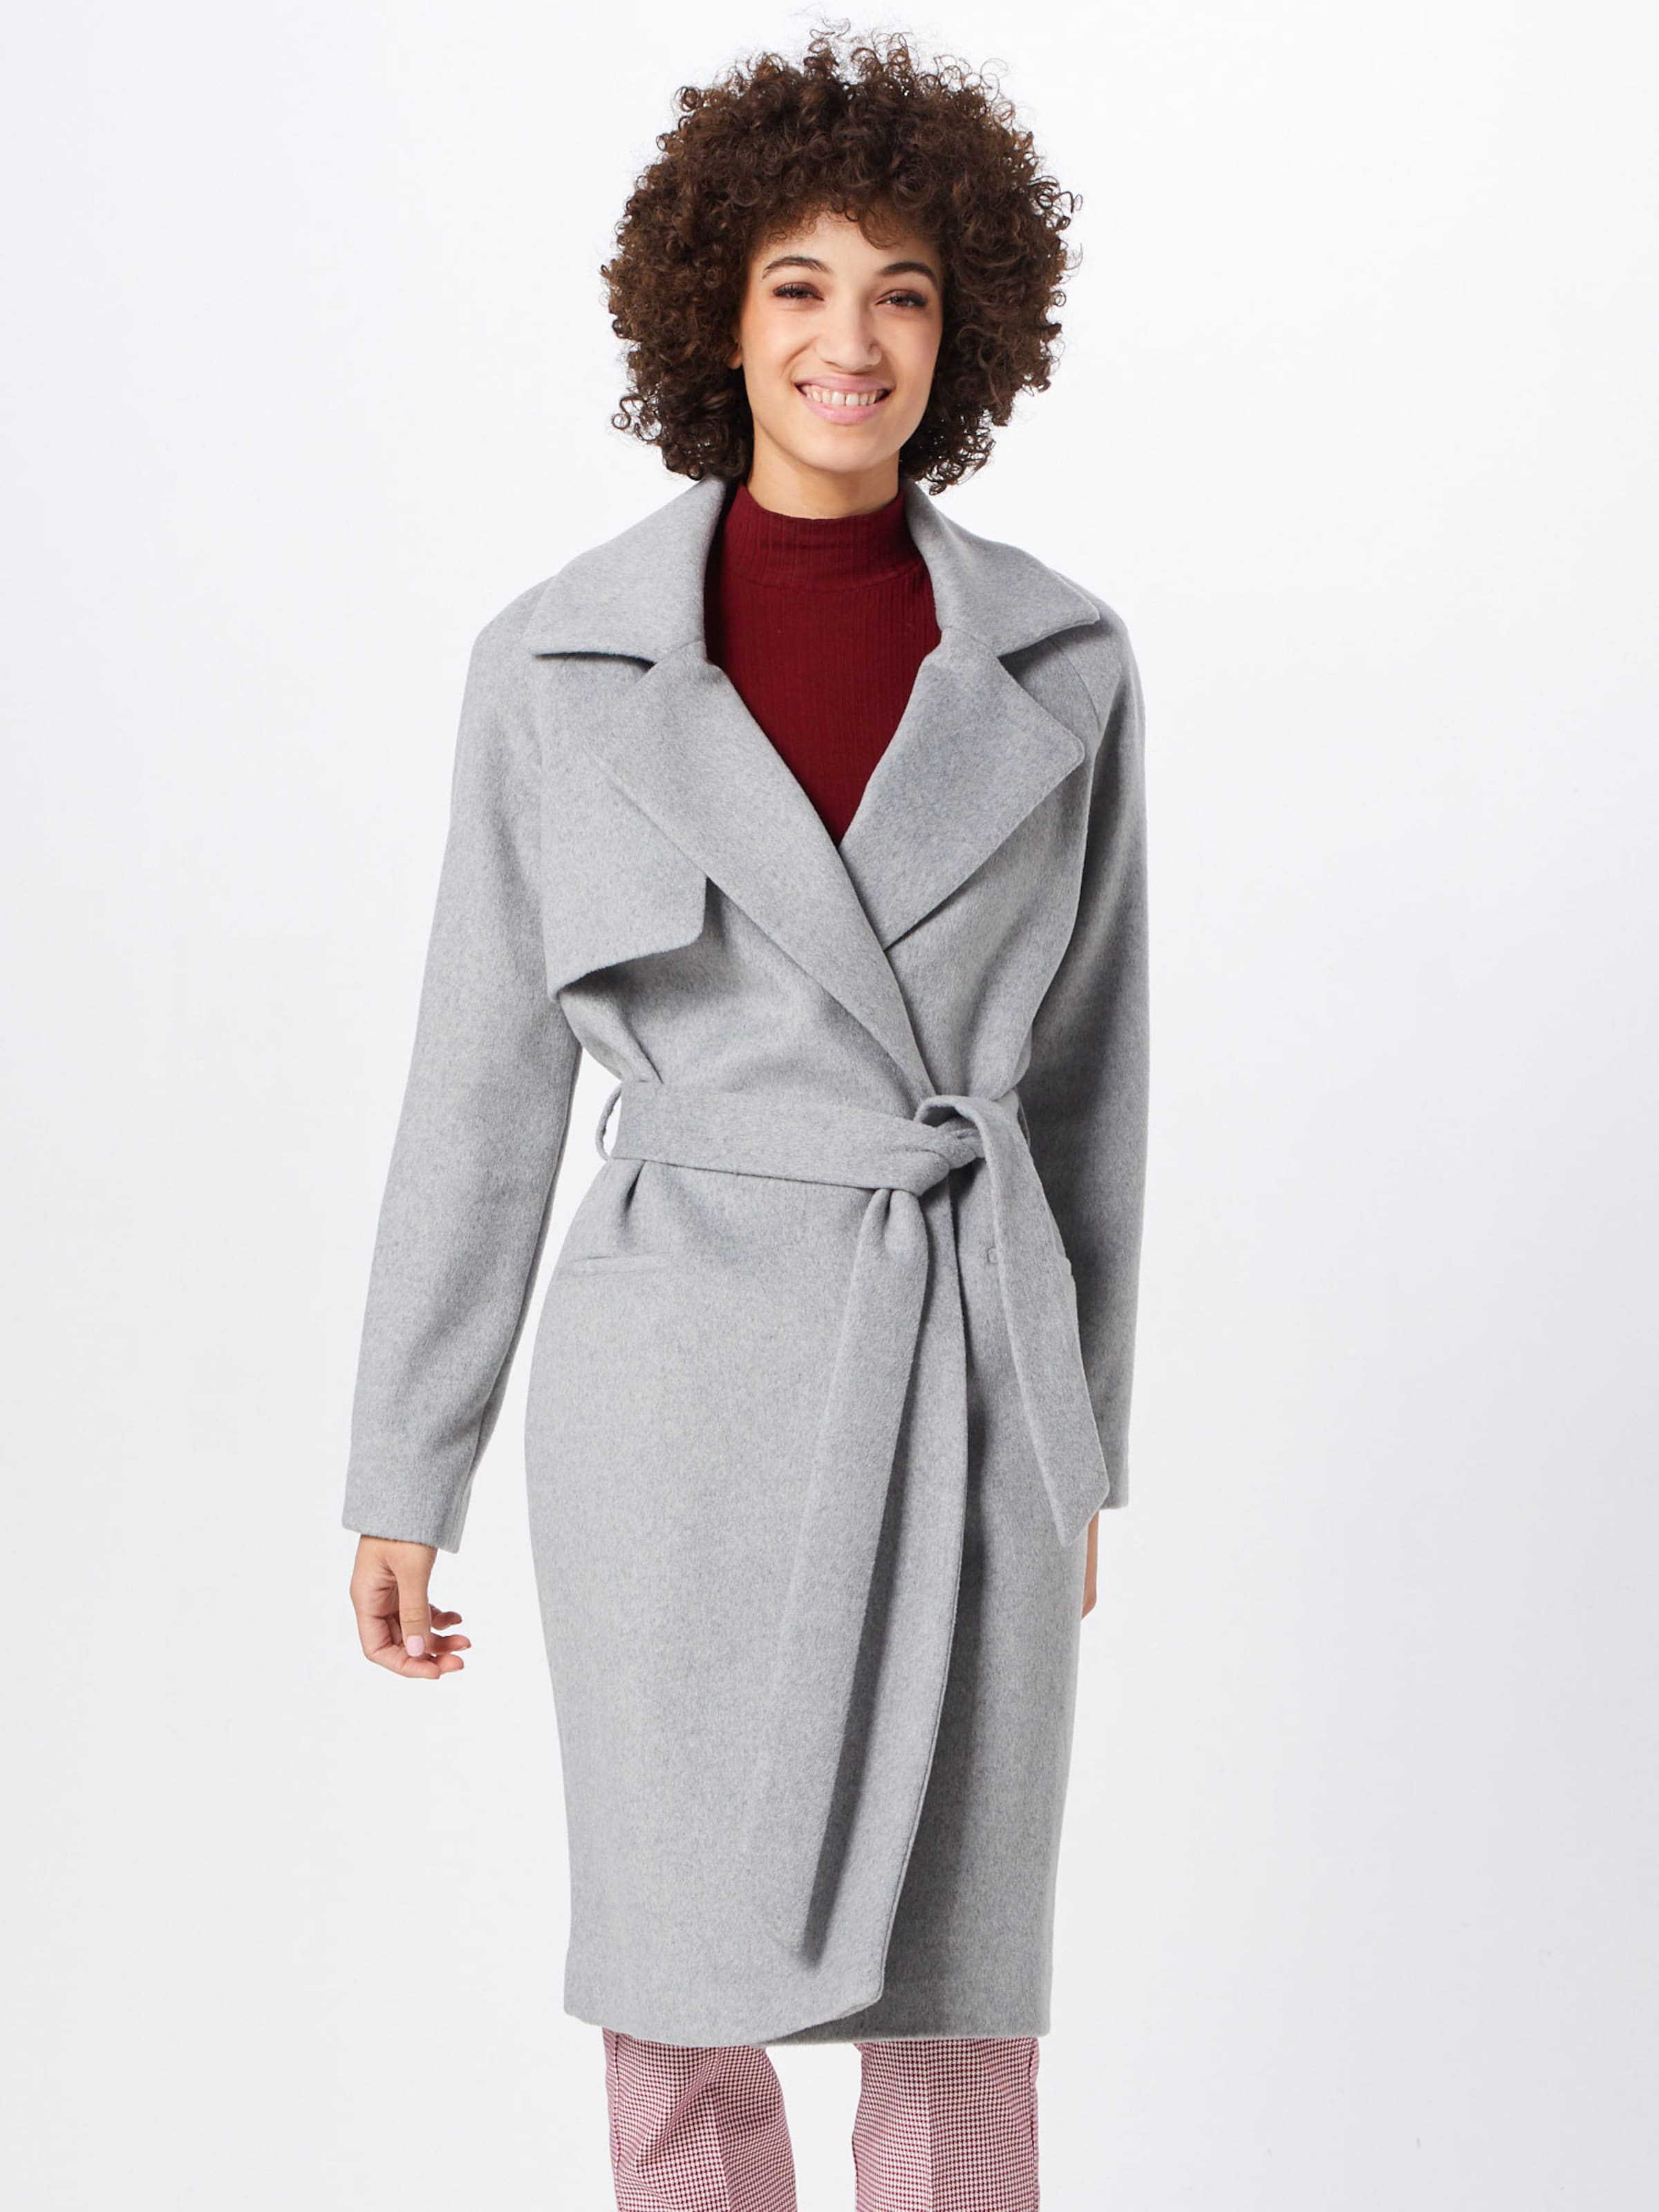 Mursten lure grube 2NDDAY Between-Seasons Coat 'Livia' in Light Grey | ABOUT YOU